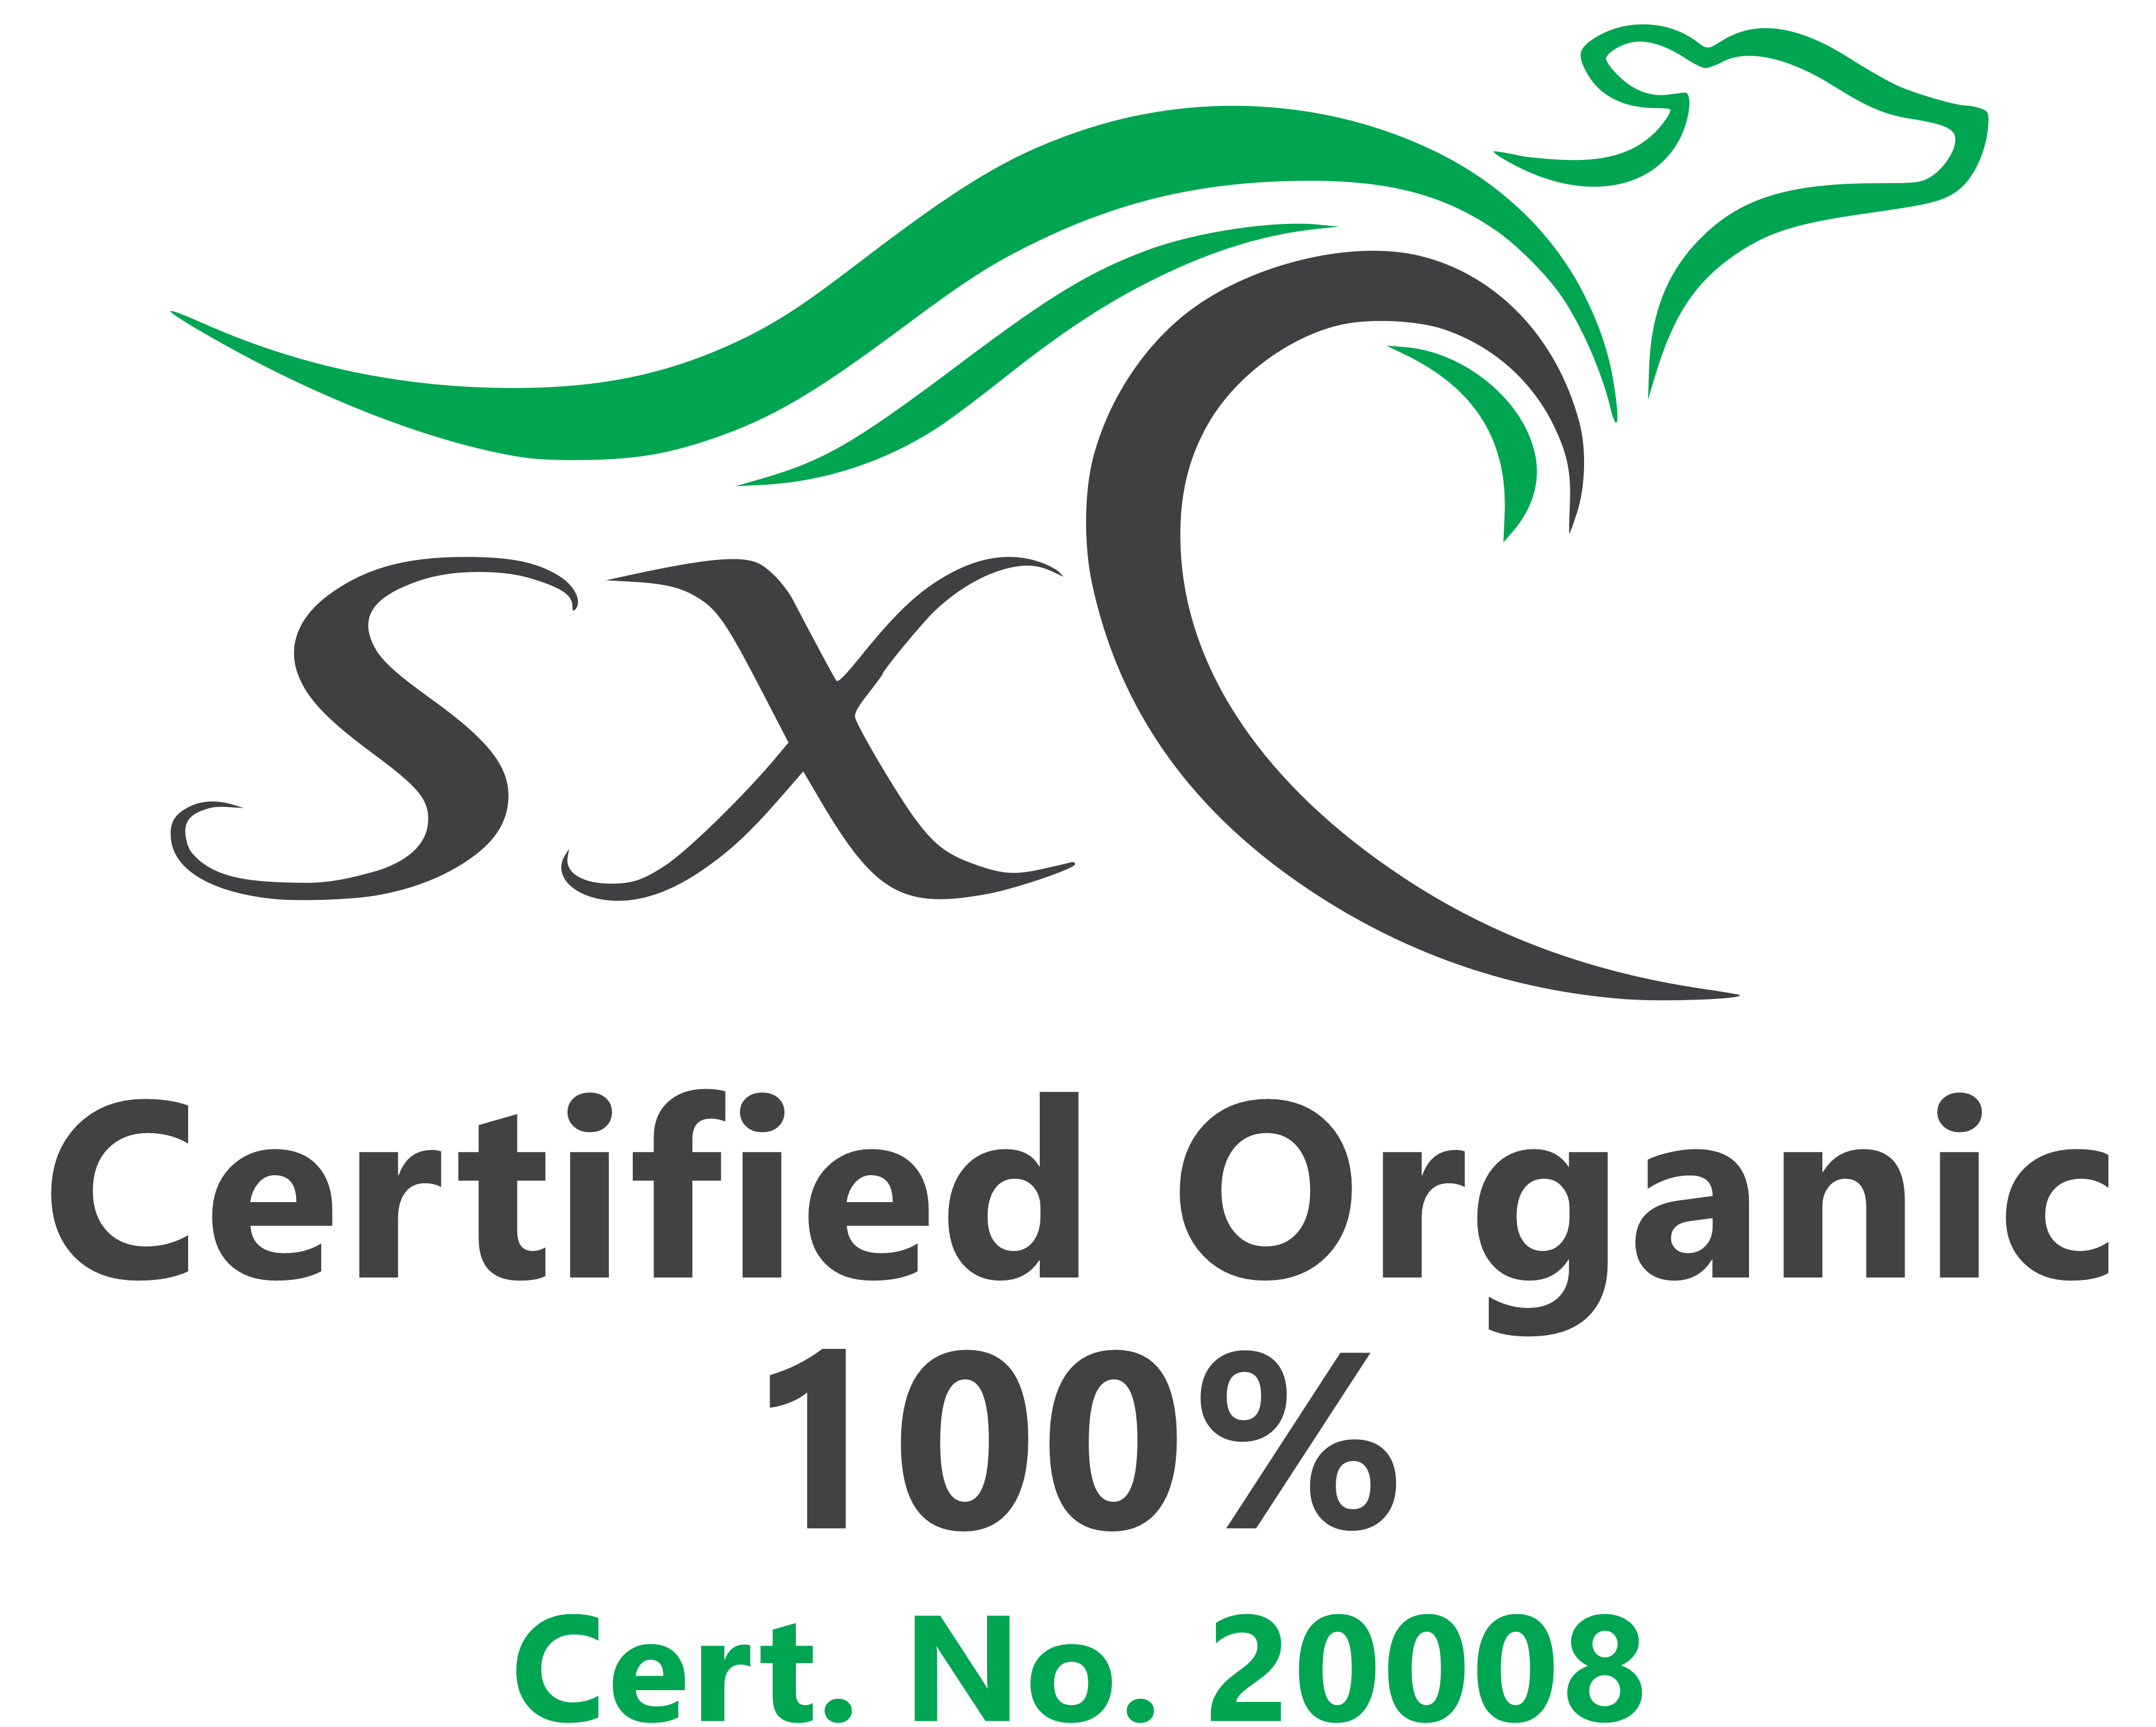 Southern Cross Certified number 20008 logo 002